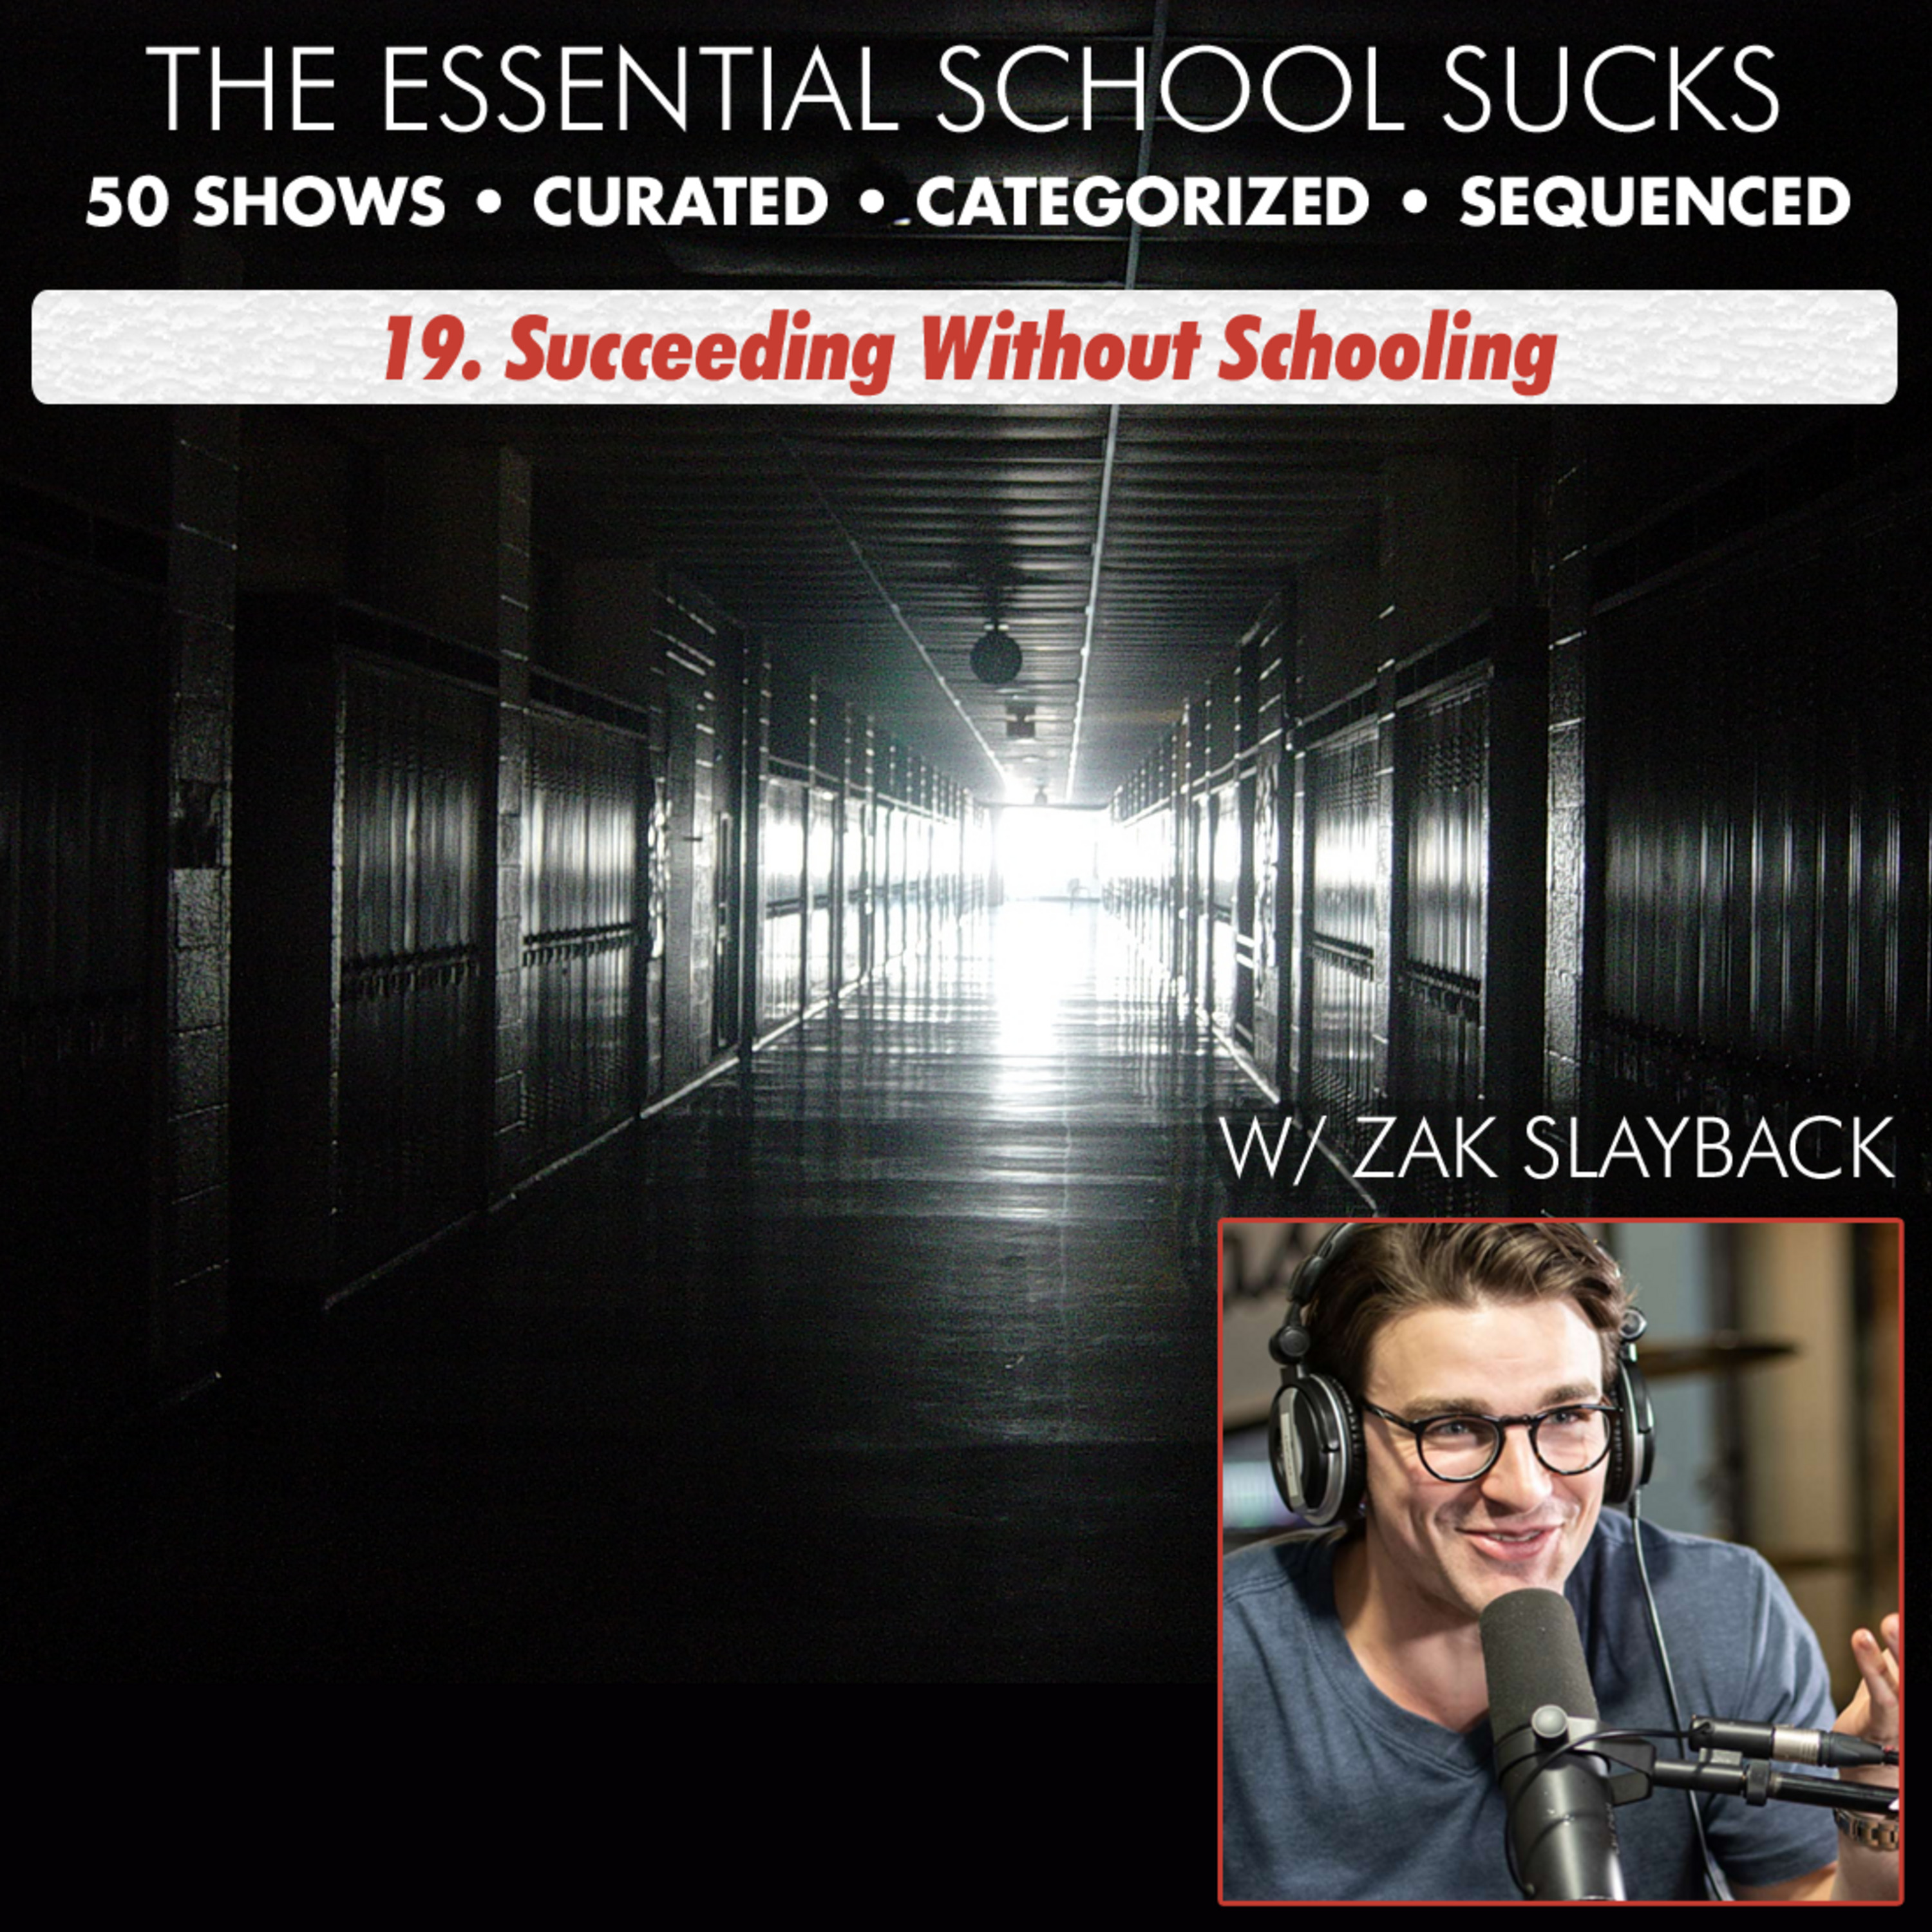 19. Succeeding Without Schooling